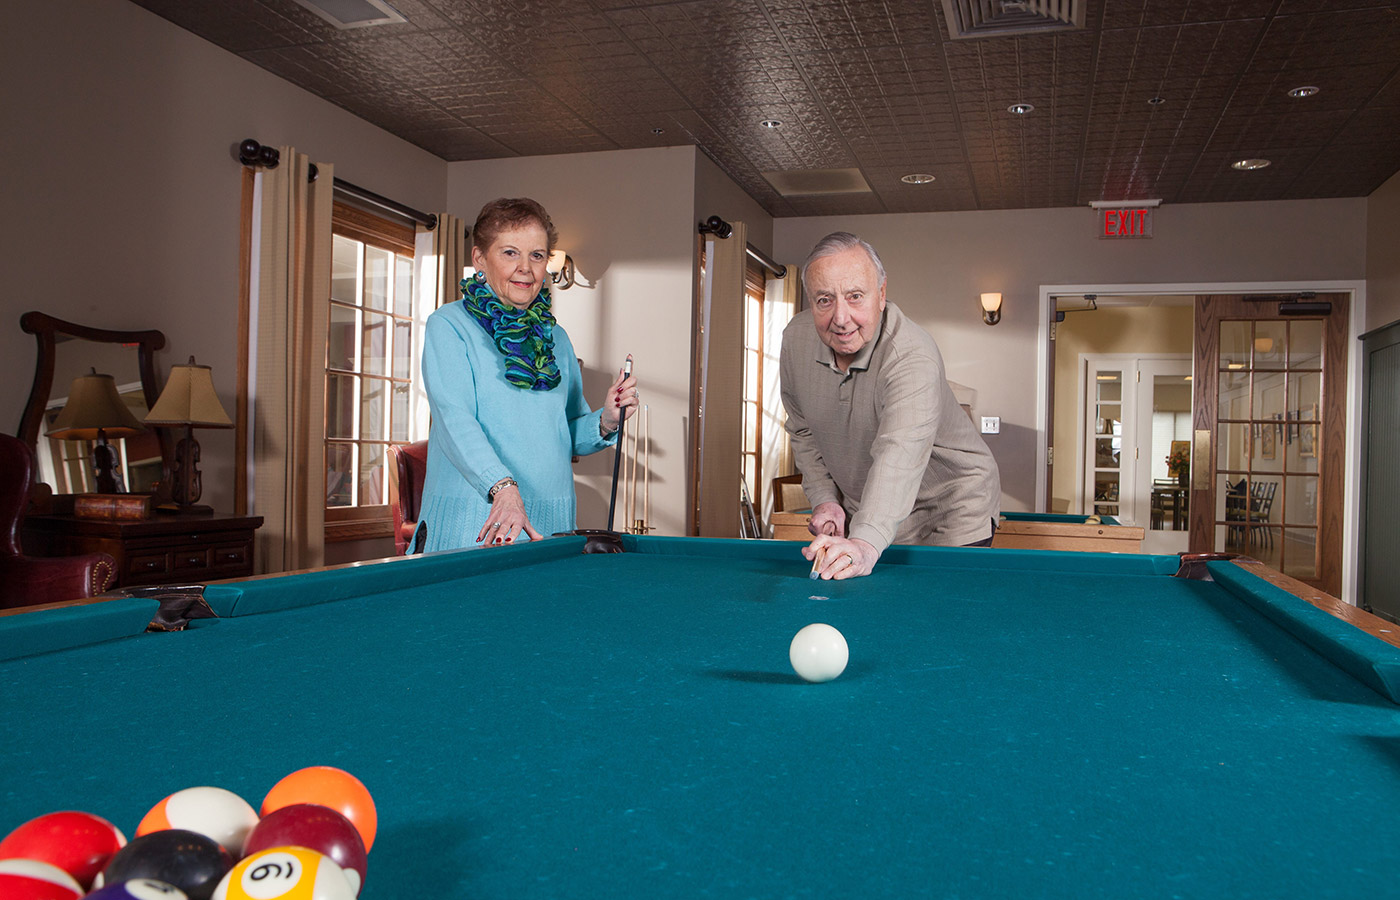 Two residents are playing a game of pool.